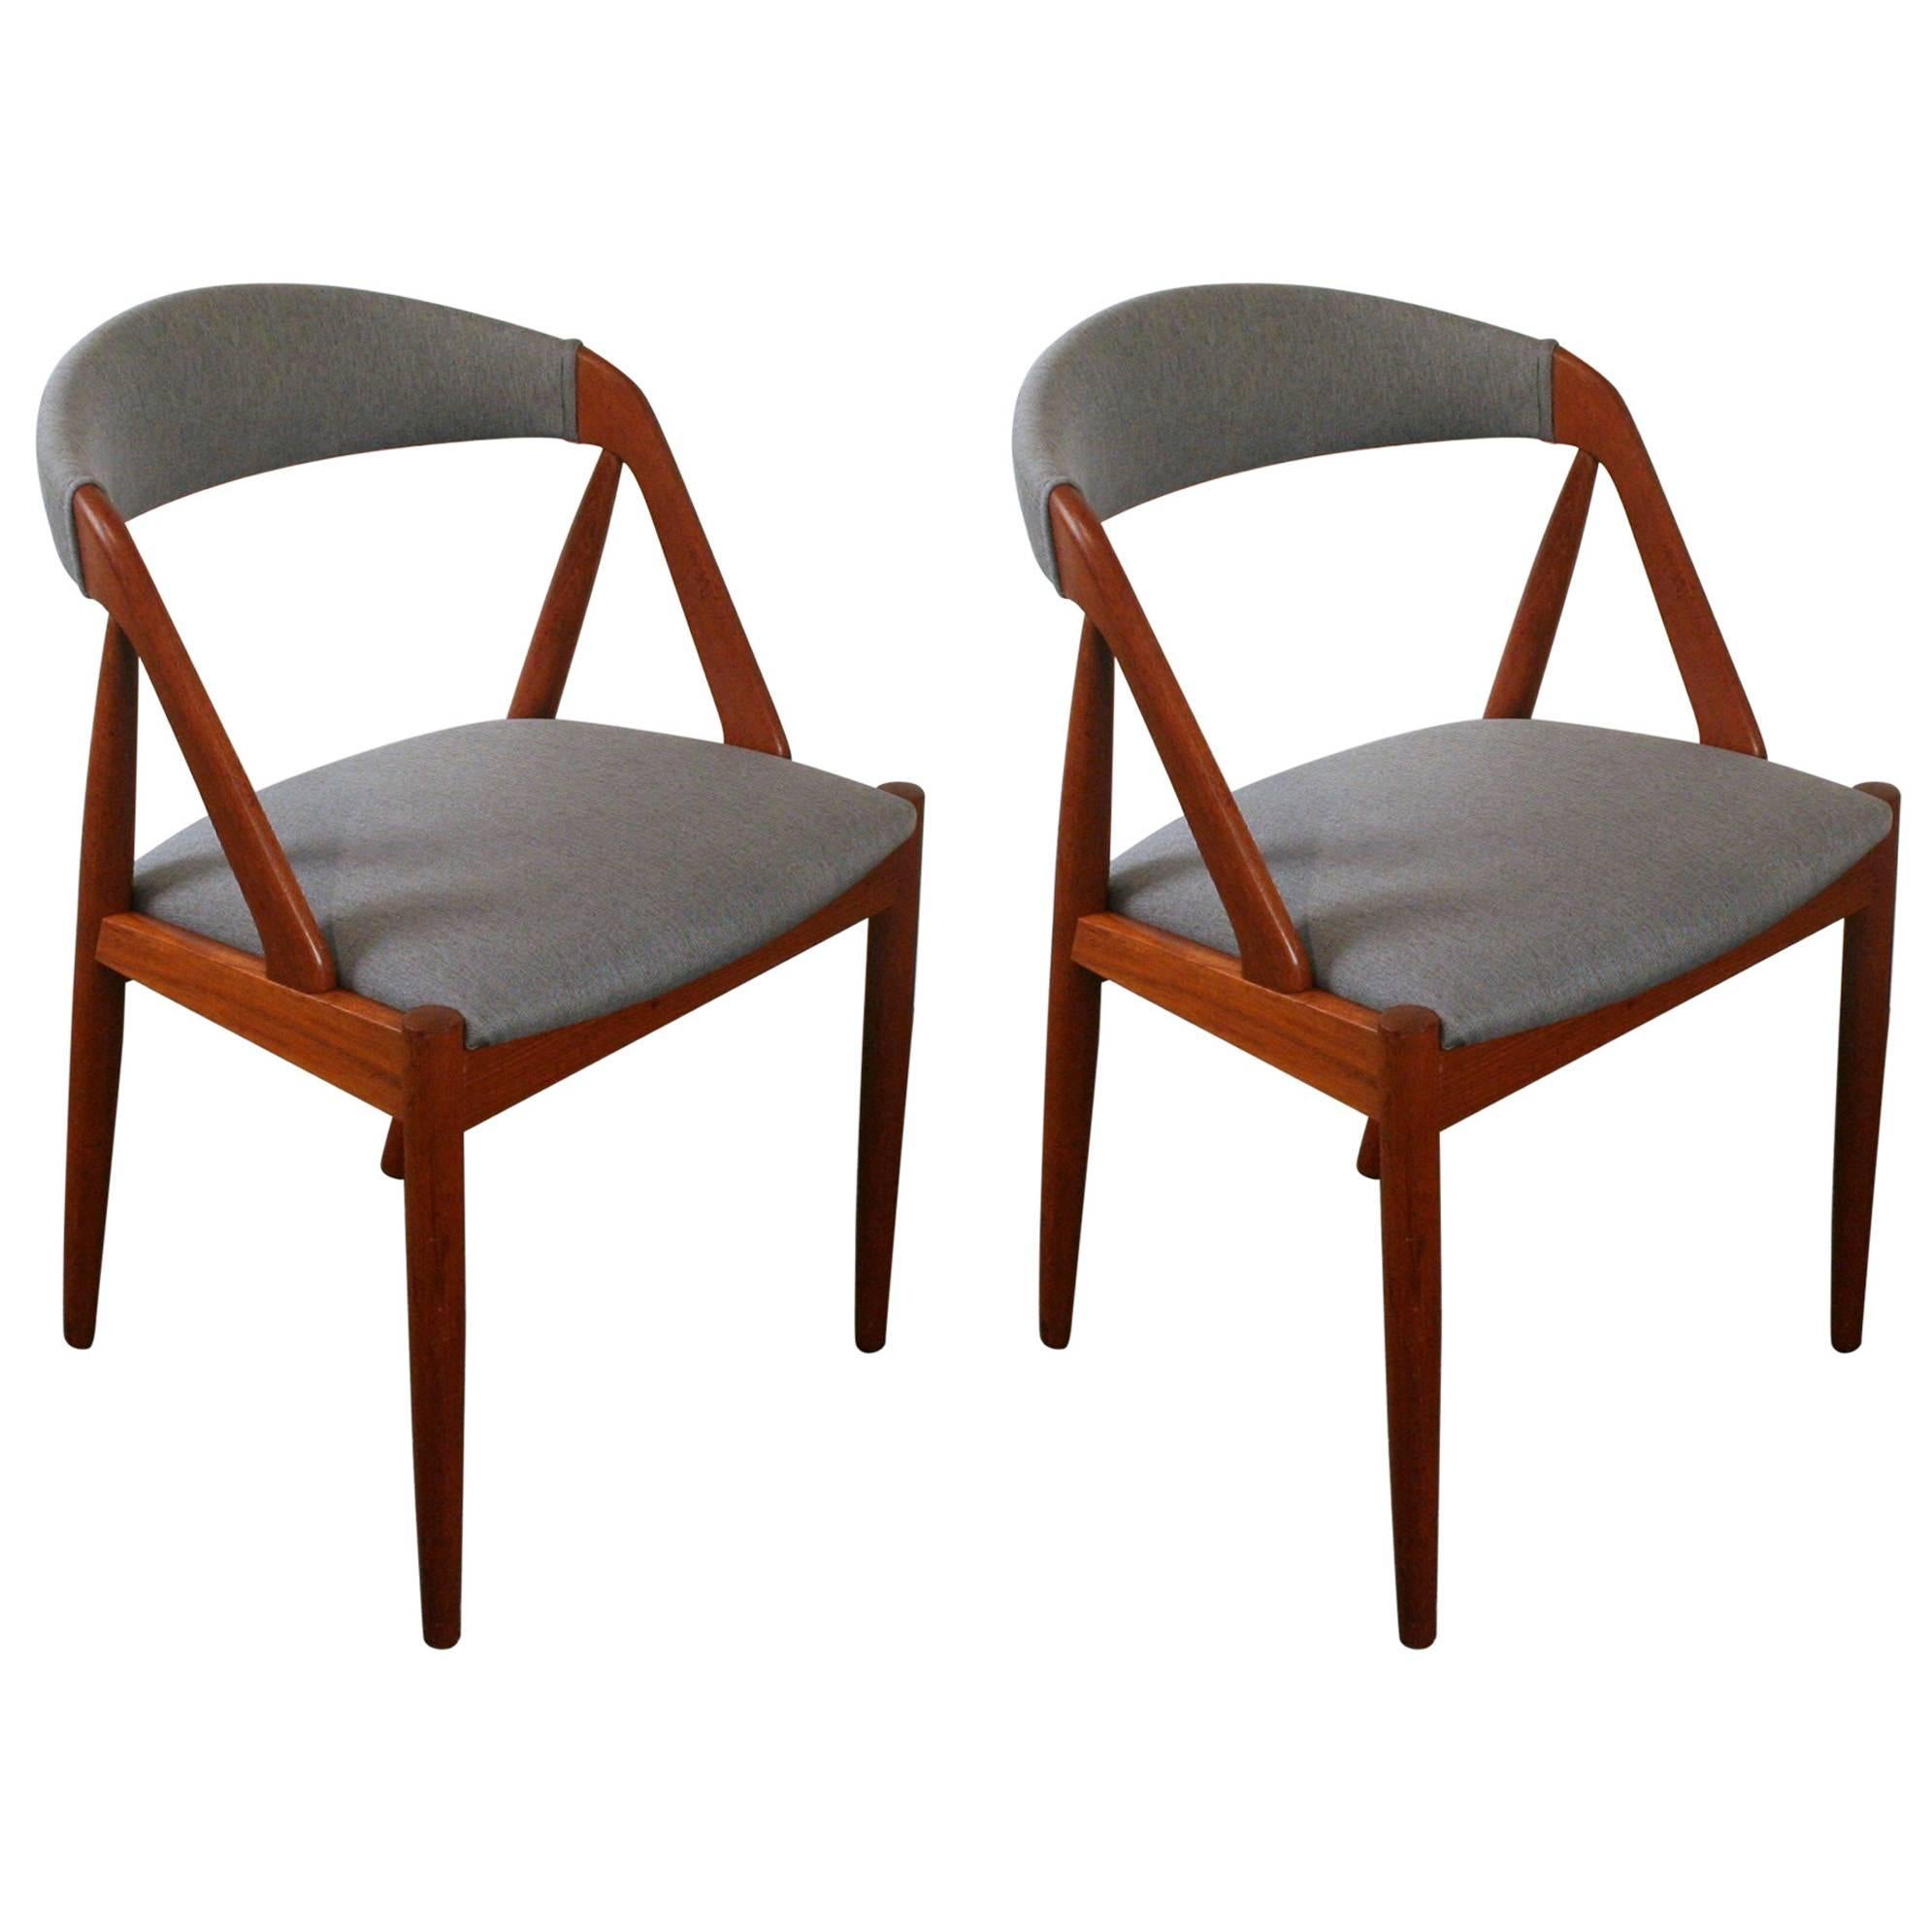 Pair of Vintage Teak Model 31 Dining Chairs by Kai Kristiansen For Sale